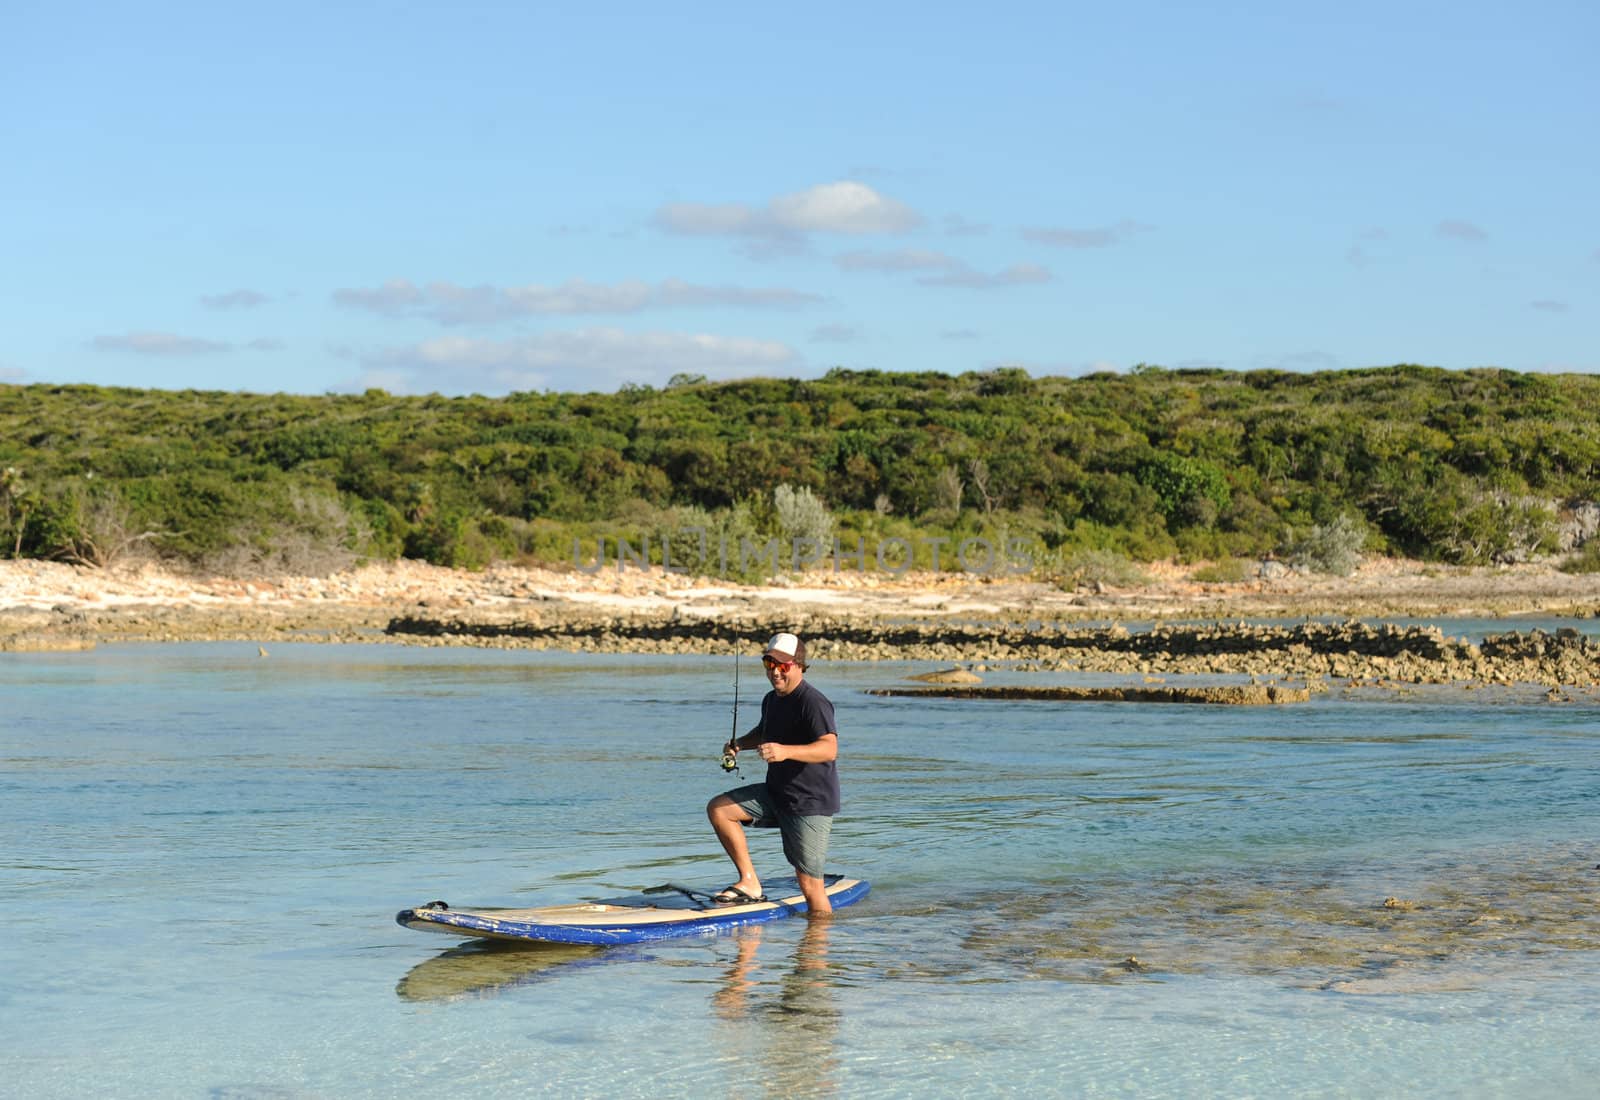 Man stepping off paddleboard while fishing in scenic tropical destination